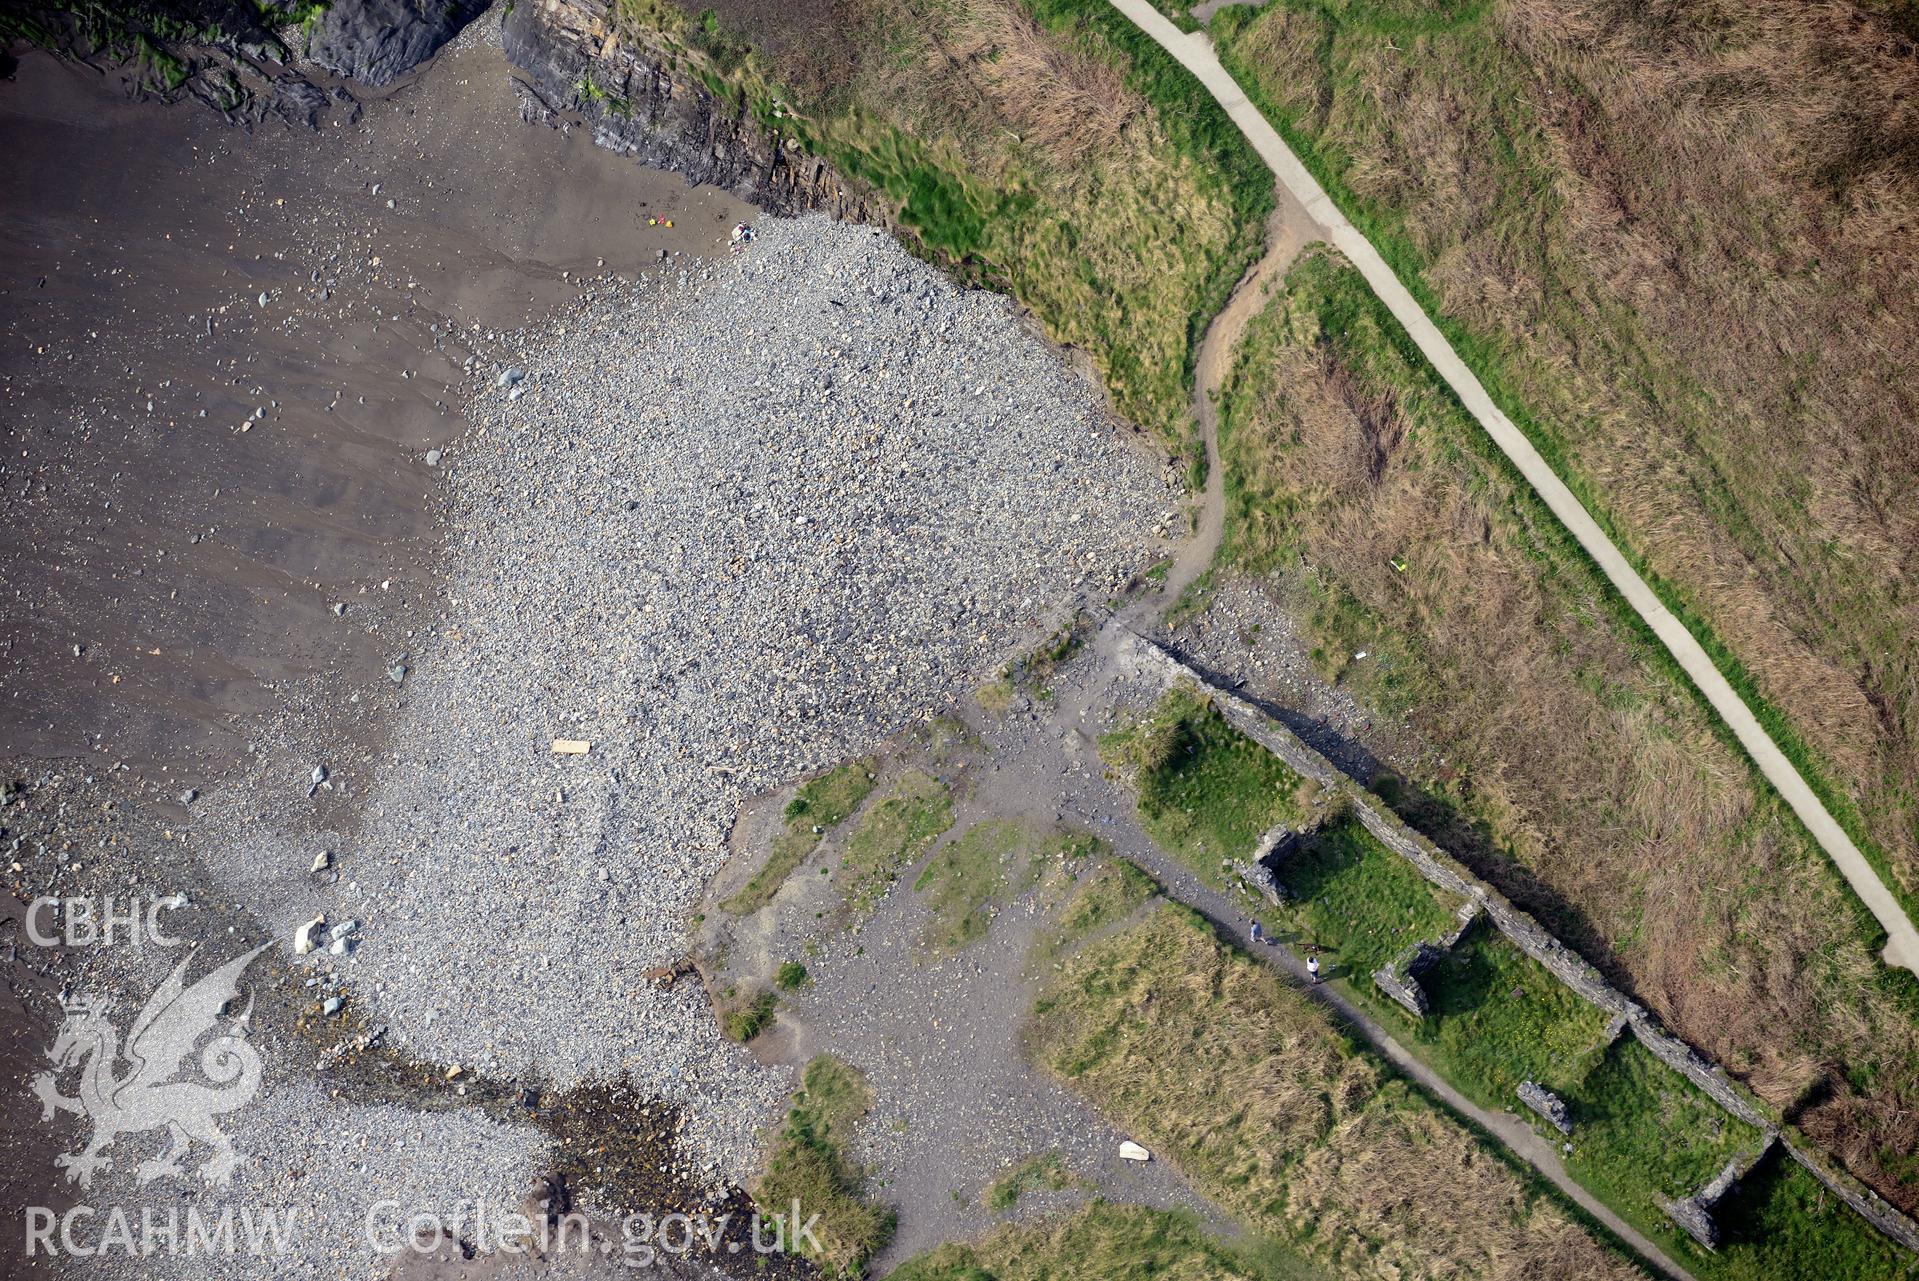 Royal Commission aerial photograph of Abereiddi/Abereiddy taken on 27th March 2017. Baseline aerial reconnaissance survey for the CHERISH Project. ? Crown: CHERISH PROJECT 2017. Produced with EU funds through the Ireland Wales Co-operation Programme 2014-2020. All material made freely available through the Open Government Licence.